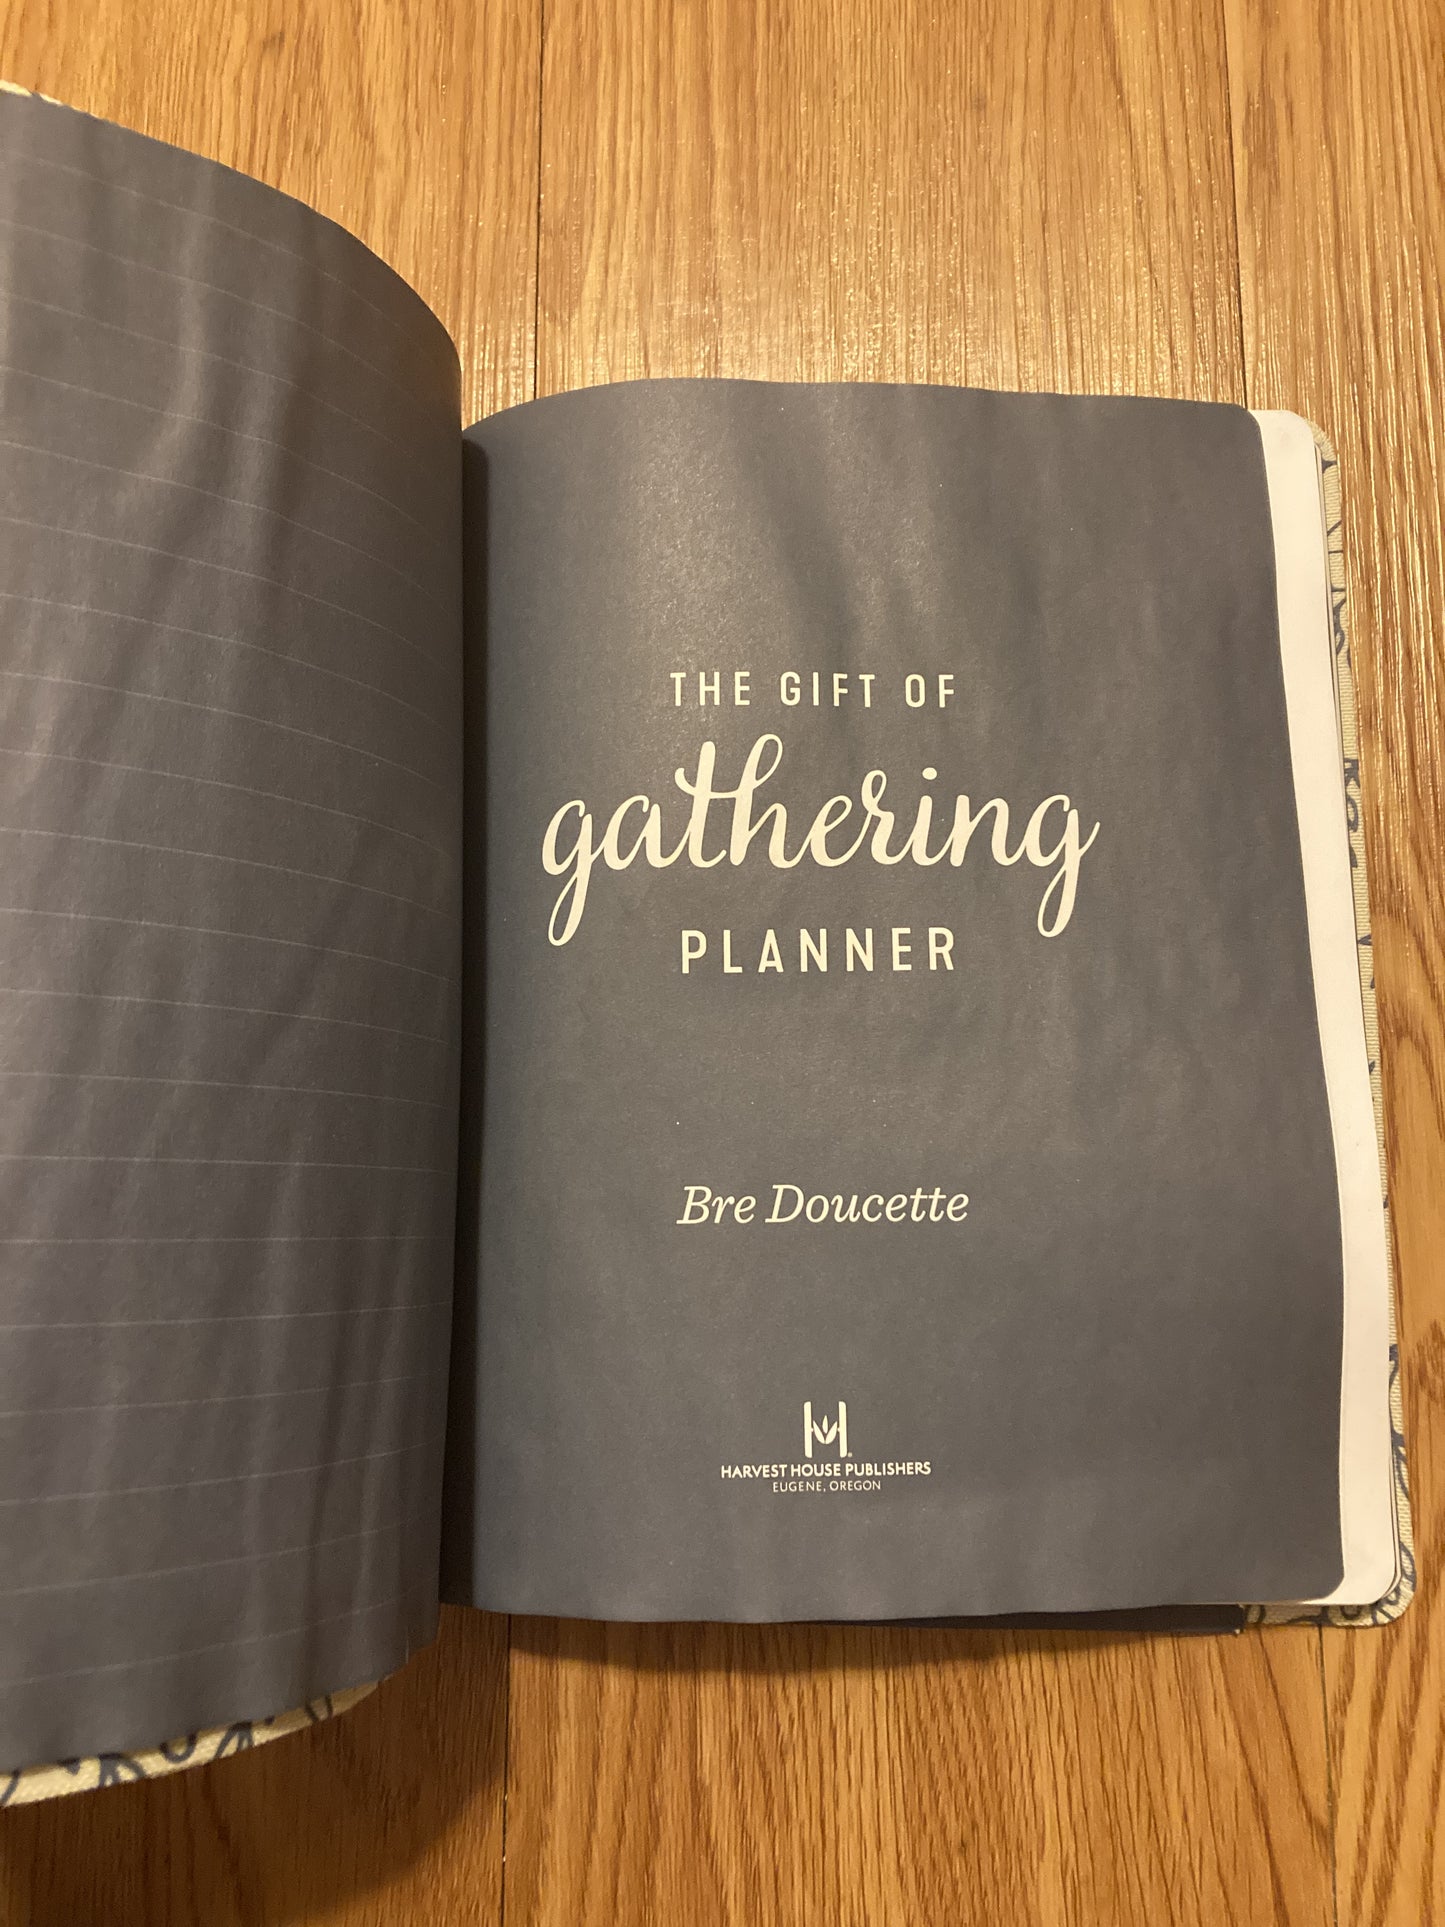 The Gift of Gathering Planner: Simple Ways to Organize